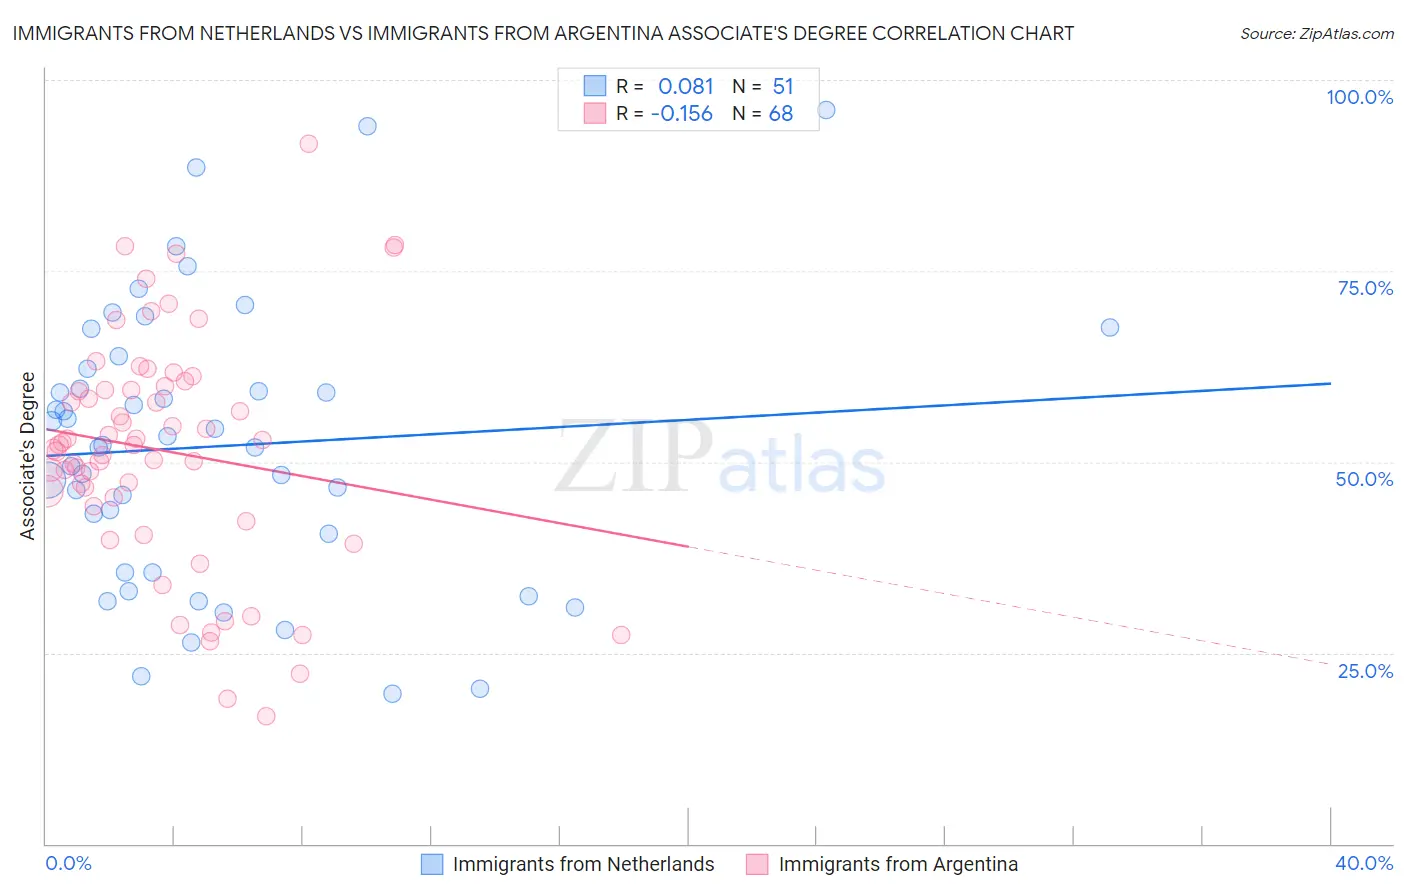 Immigrants from Netherlands vs Immigrants from Argentina Associate's Degree